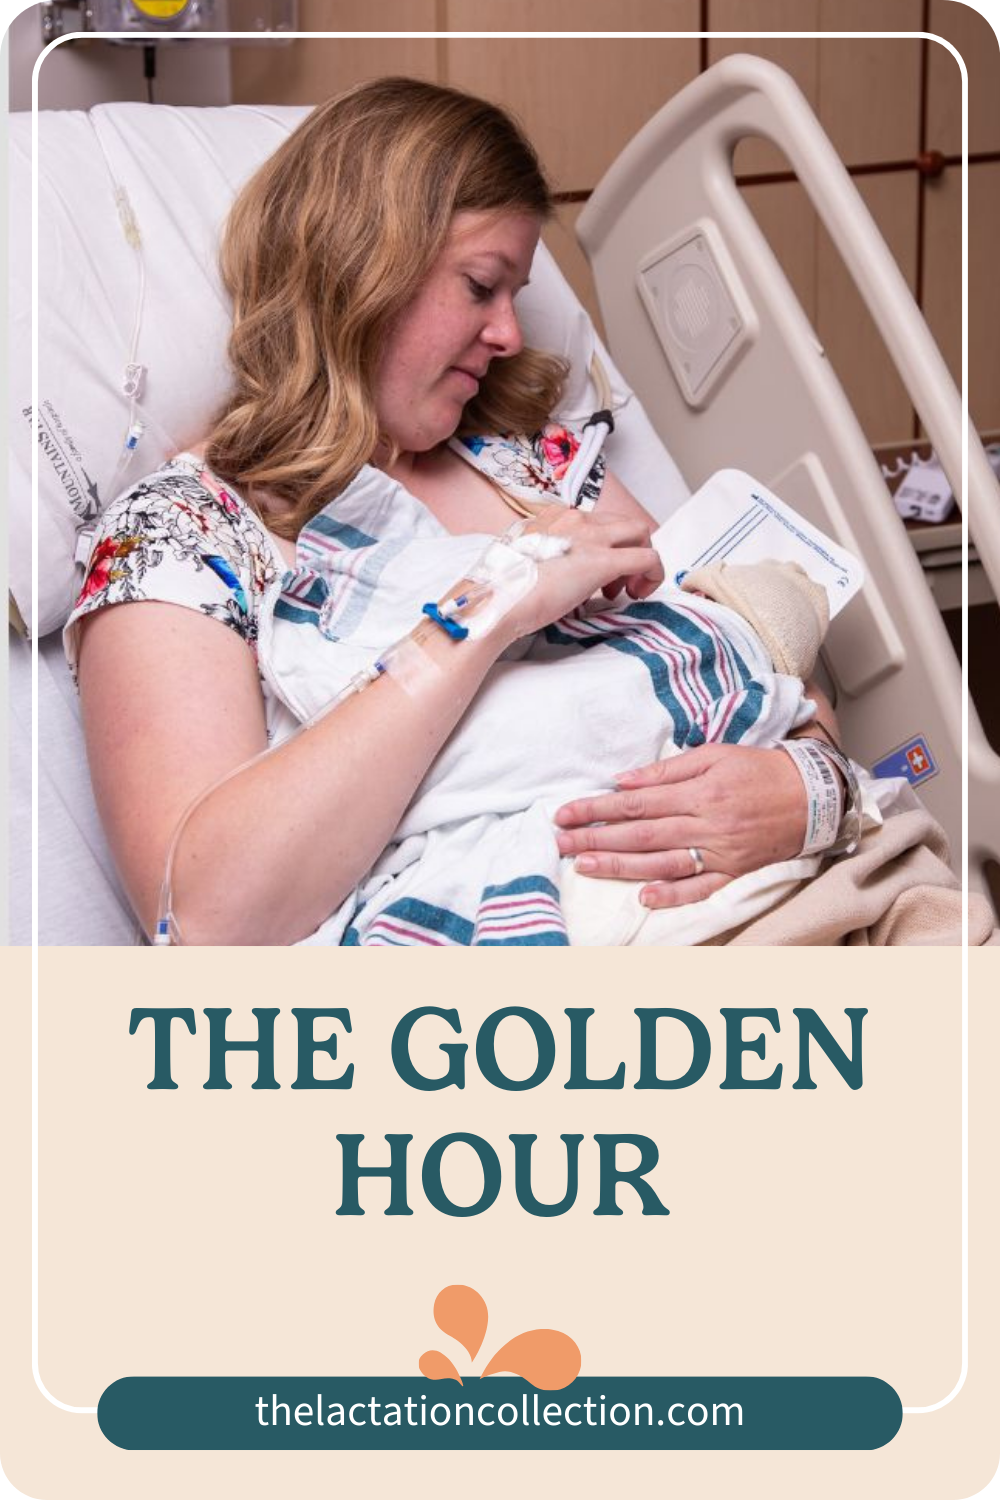 An educational pin from The Lactation Collection titled 'The Golden Hour', promoting the importance of early skin-to-skin contact between mother and newborn.